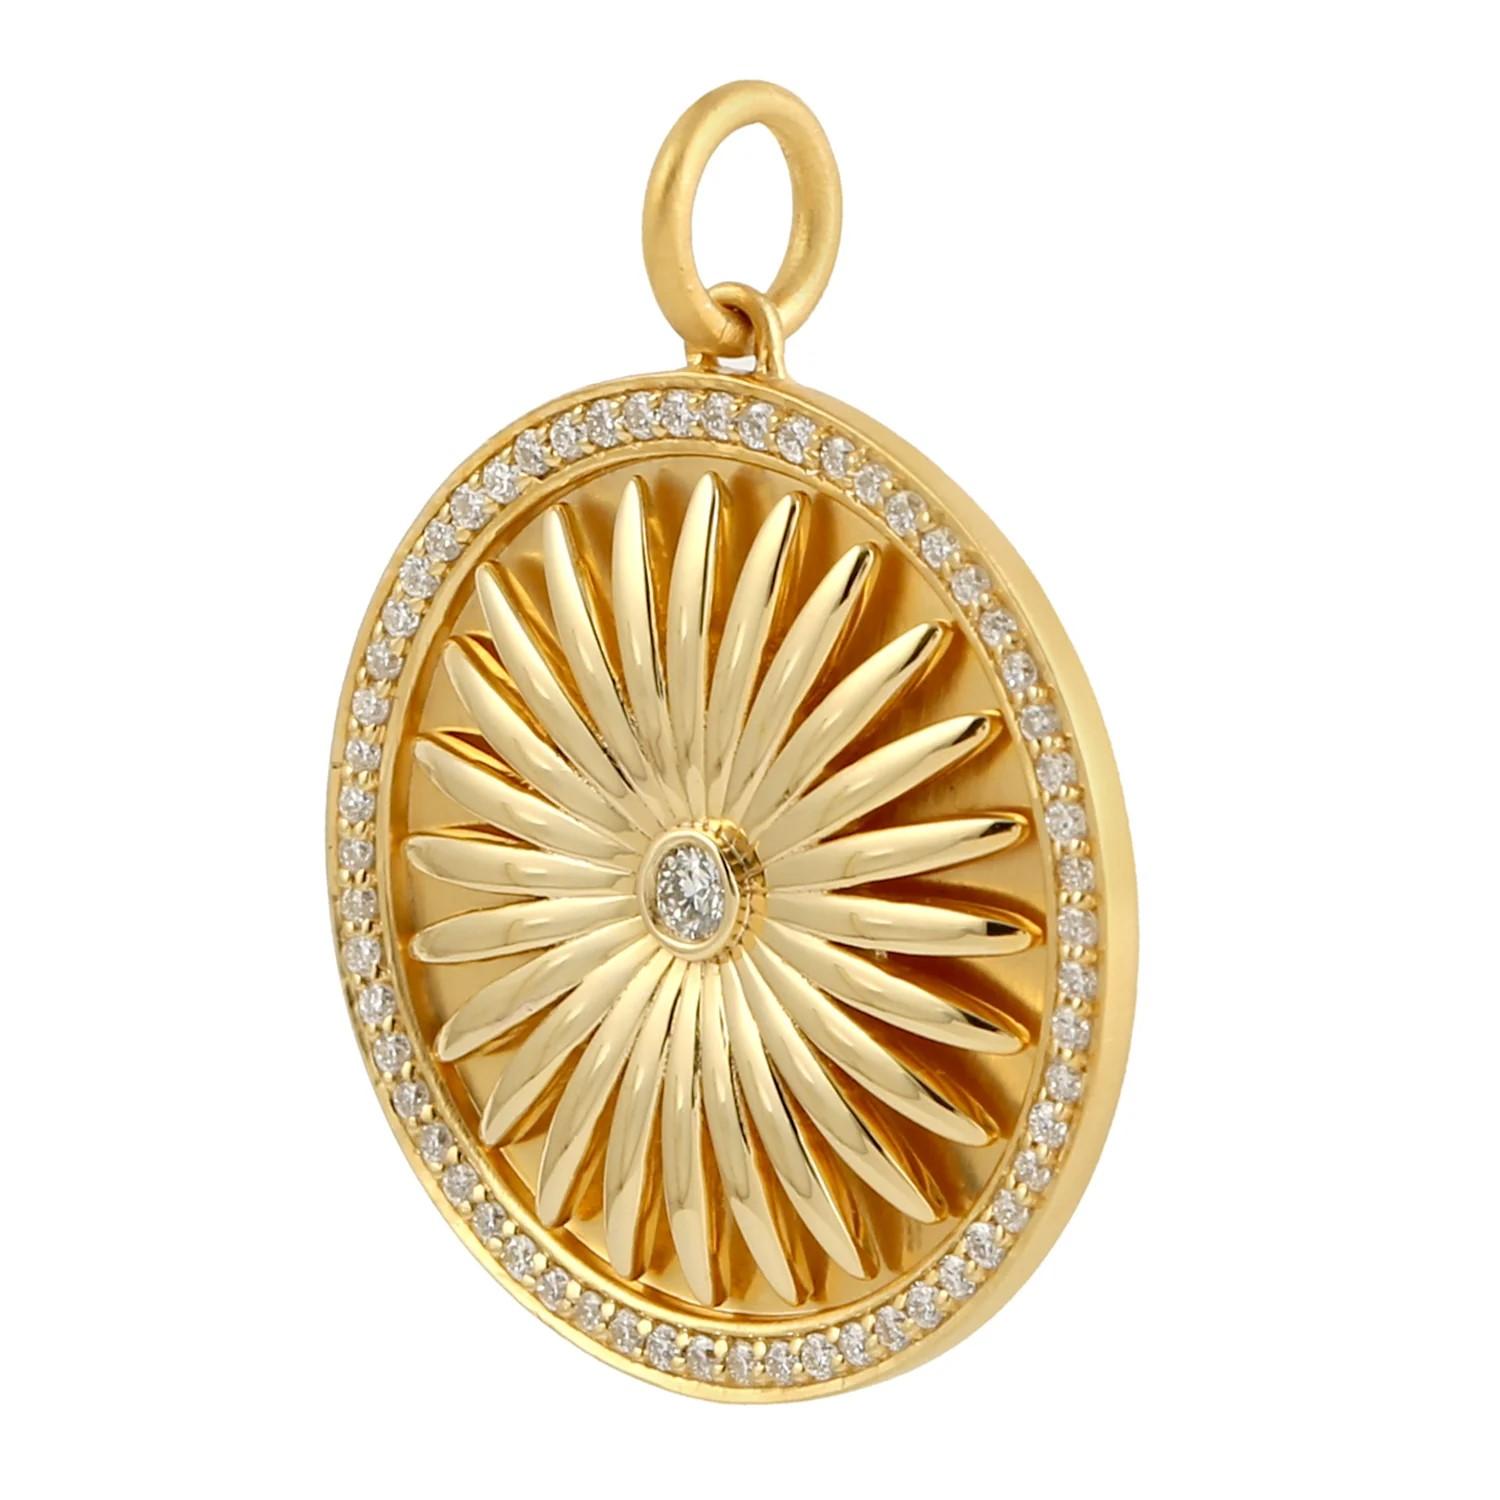 This medallion charm has been meticulously crafted from 14-karat gold and set in .34 carats of sparkling diamonds. 

FOLLOW  MEGHNA JEWELS storefront to view the latest collection & exclusive pieces.  Meghna Jewels is proudly rated as a Top Seller